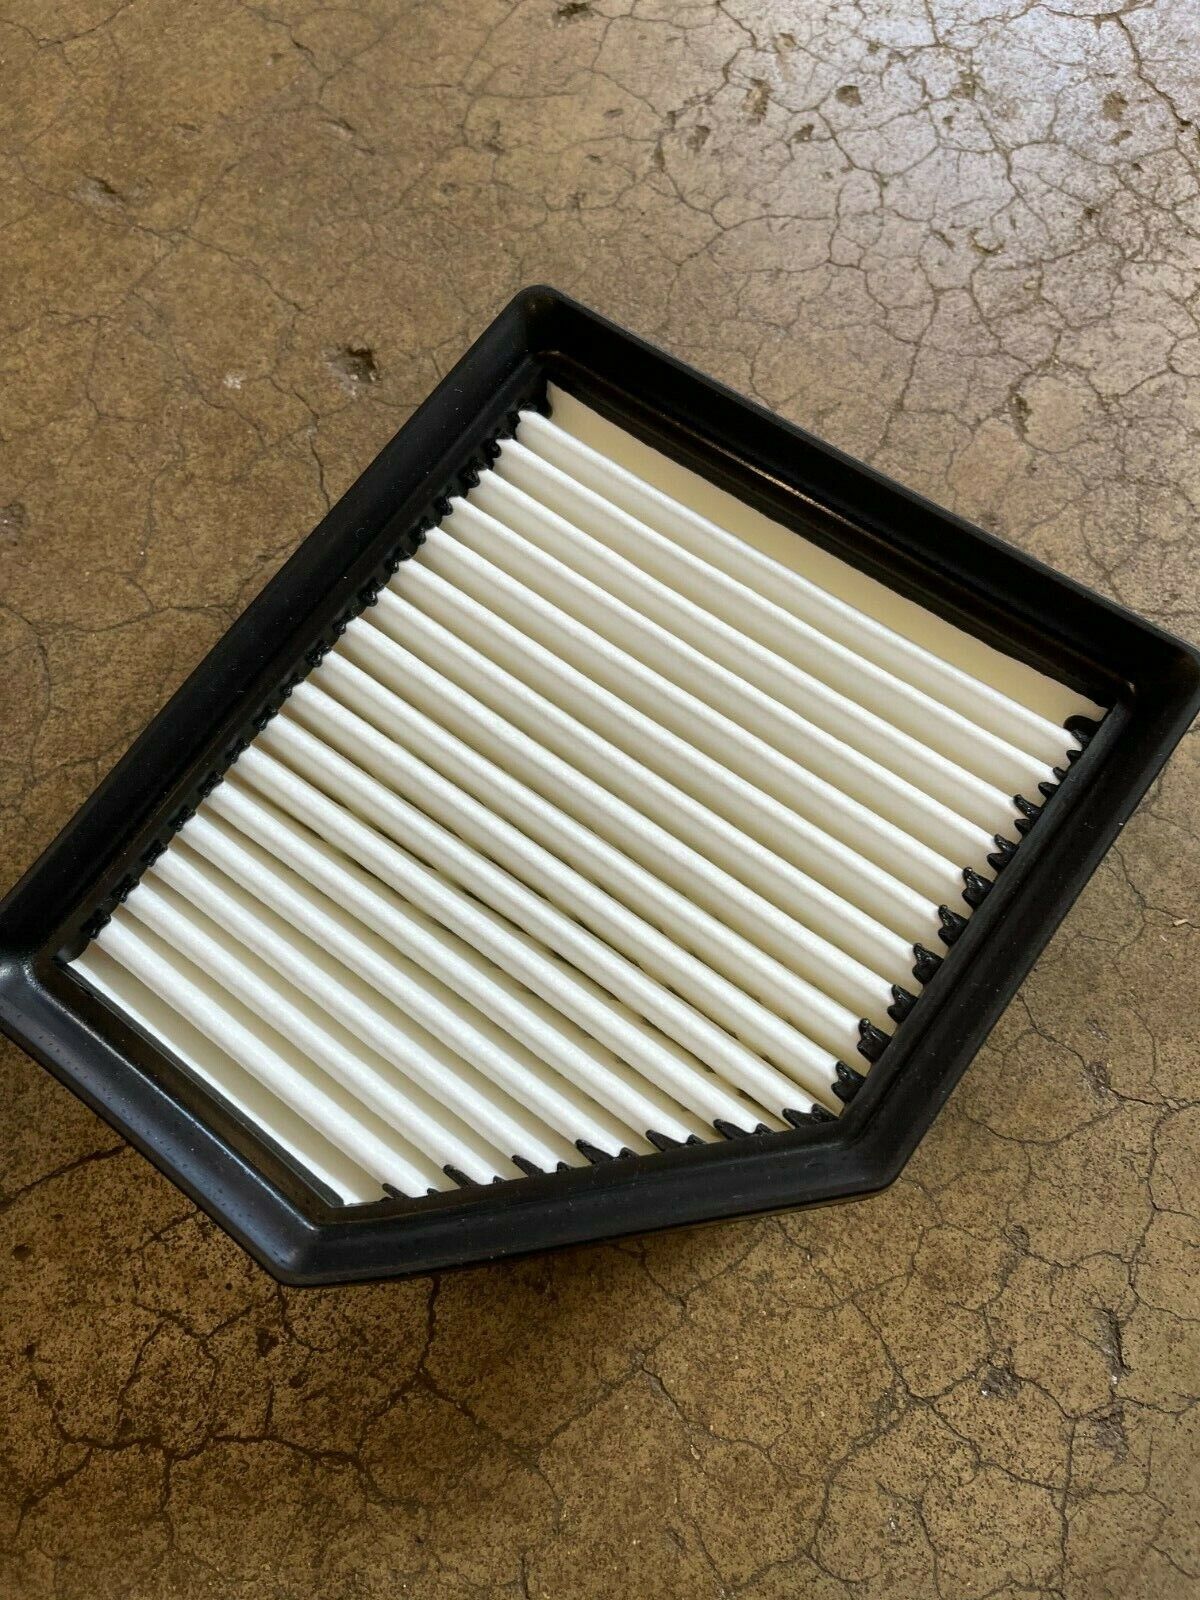 NEW OEM NISSAN AIR FILTER ELEMENT - FITS NEW 2021-2023 ROGUE 2.5 MODLES ONLY